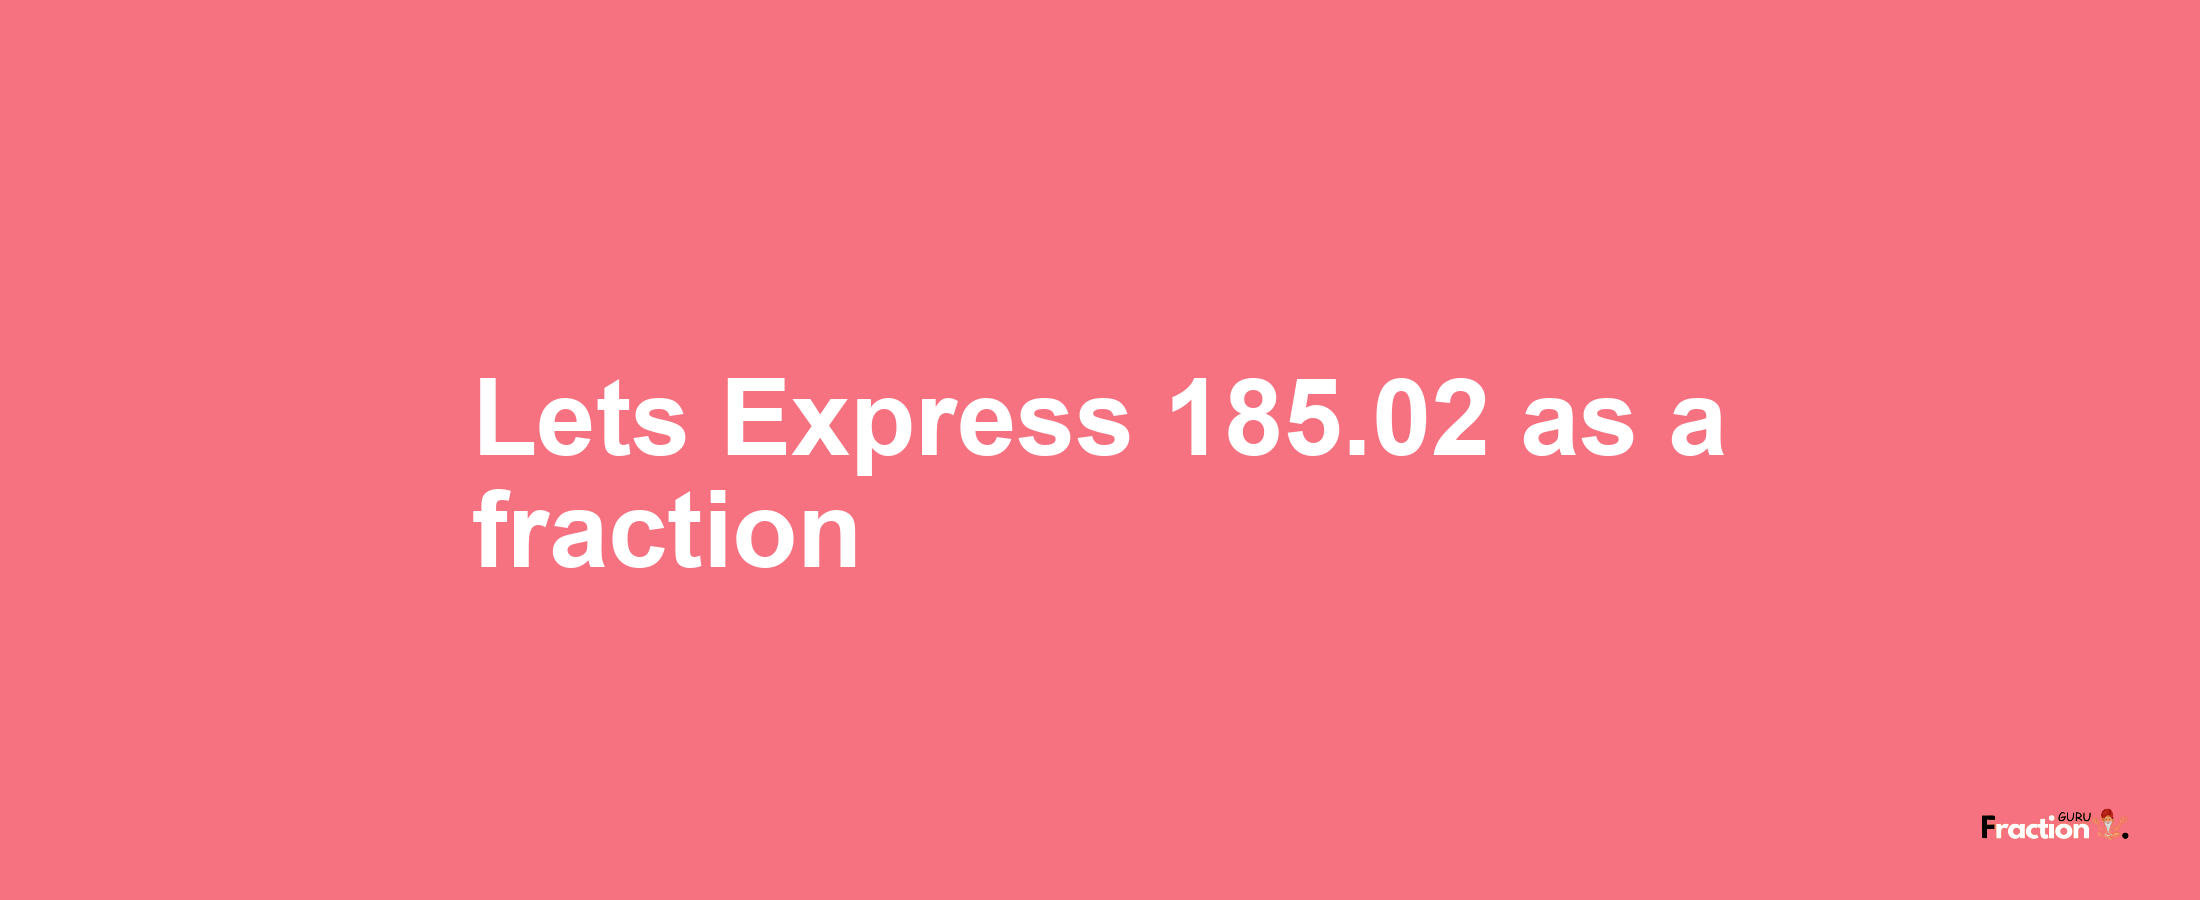 Lets Express 185.02 as afraction